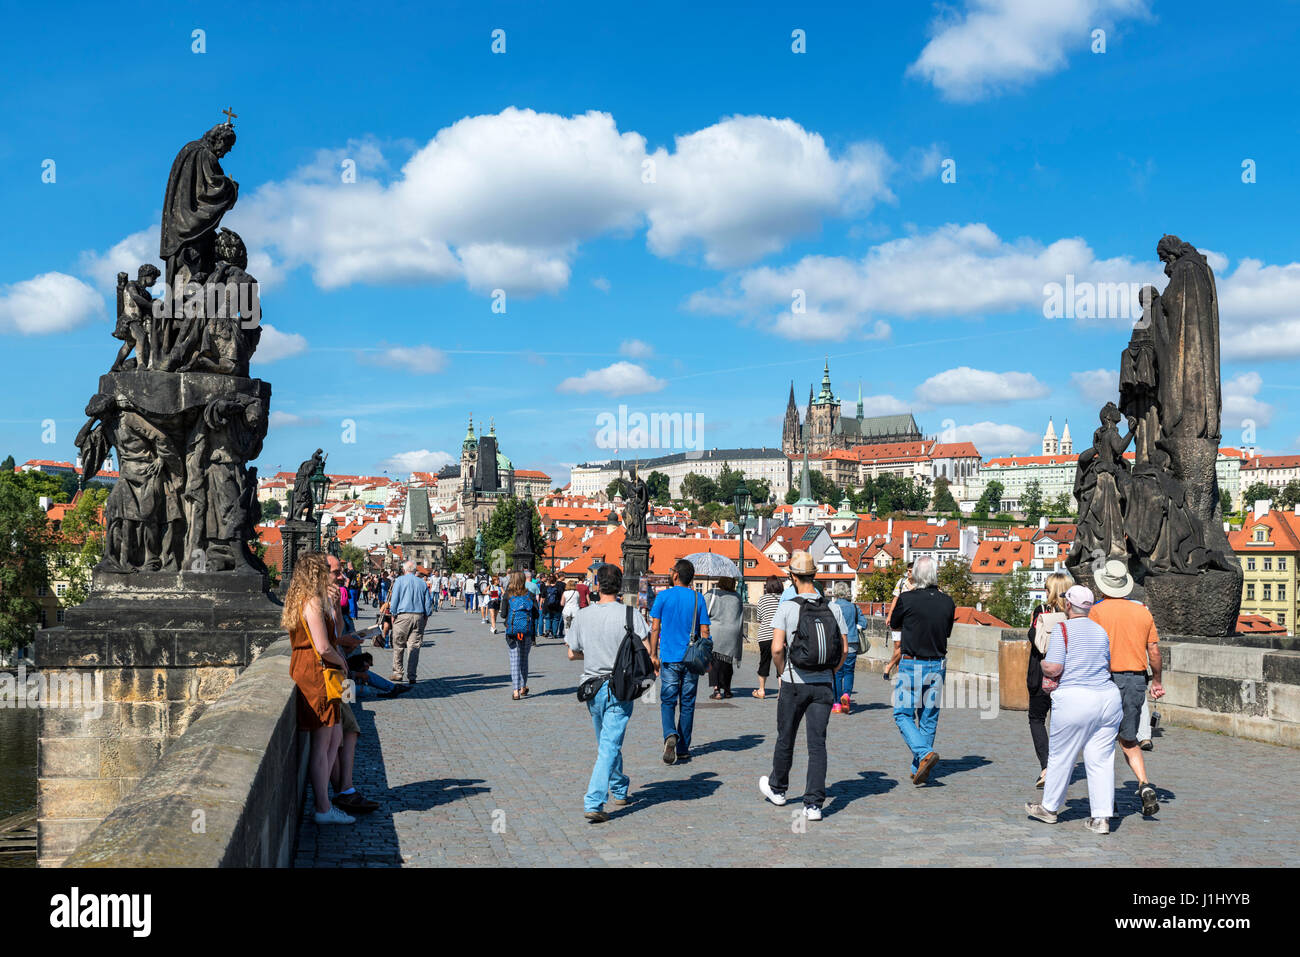 Prague. The Charles Bridge over the Vltava river looking towards Prague Castle and the spires of St Vitus Cathedral, Prague, Czech Republic Stock Photo